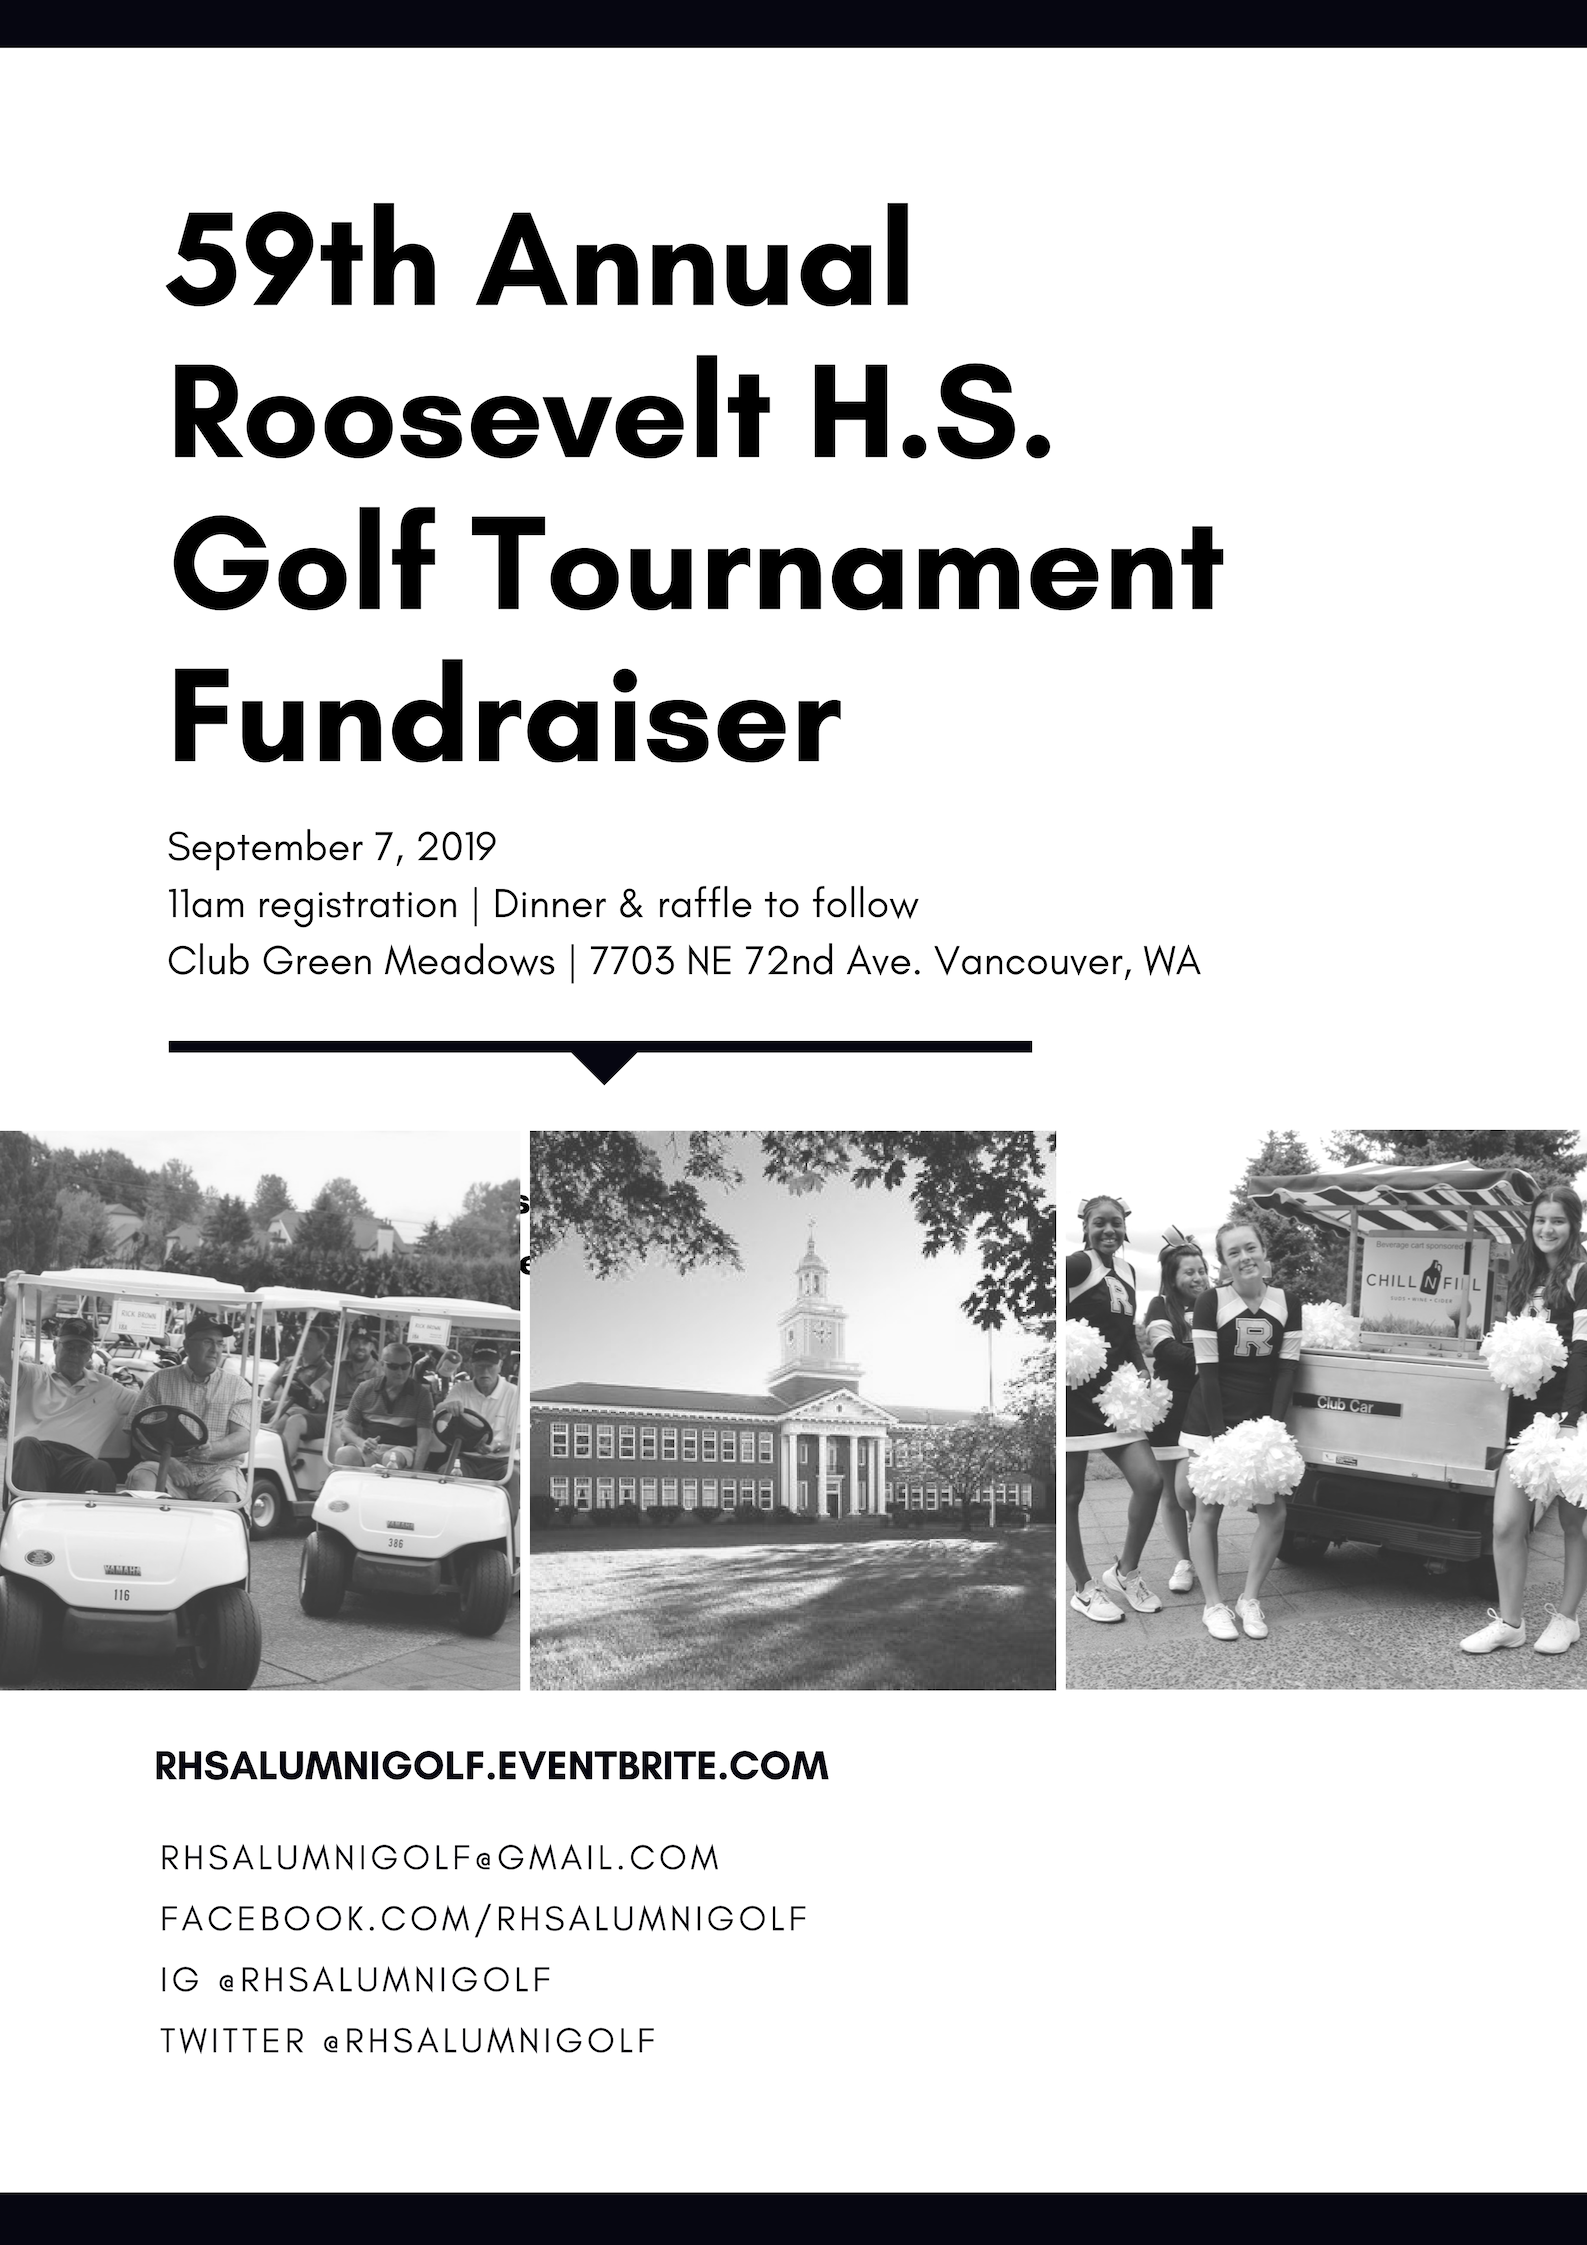 Sponsorship Packages: 59th Annual Roosevelt Golf Fundraiser